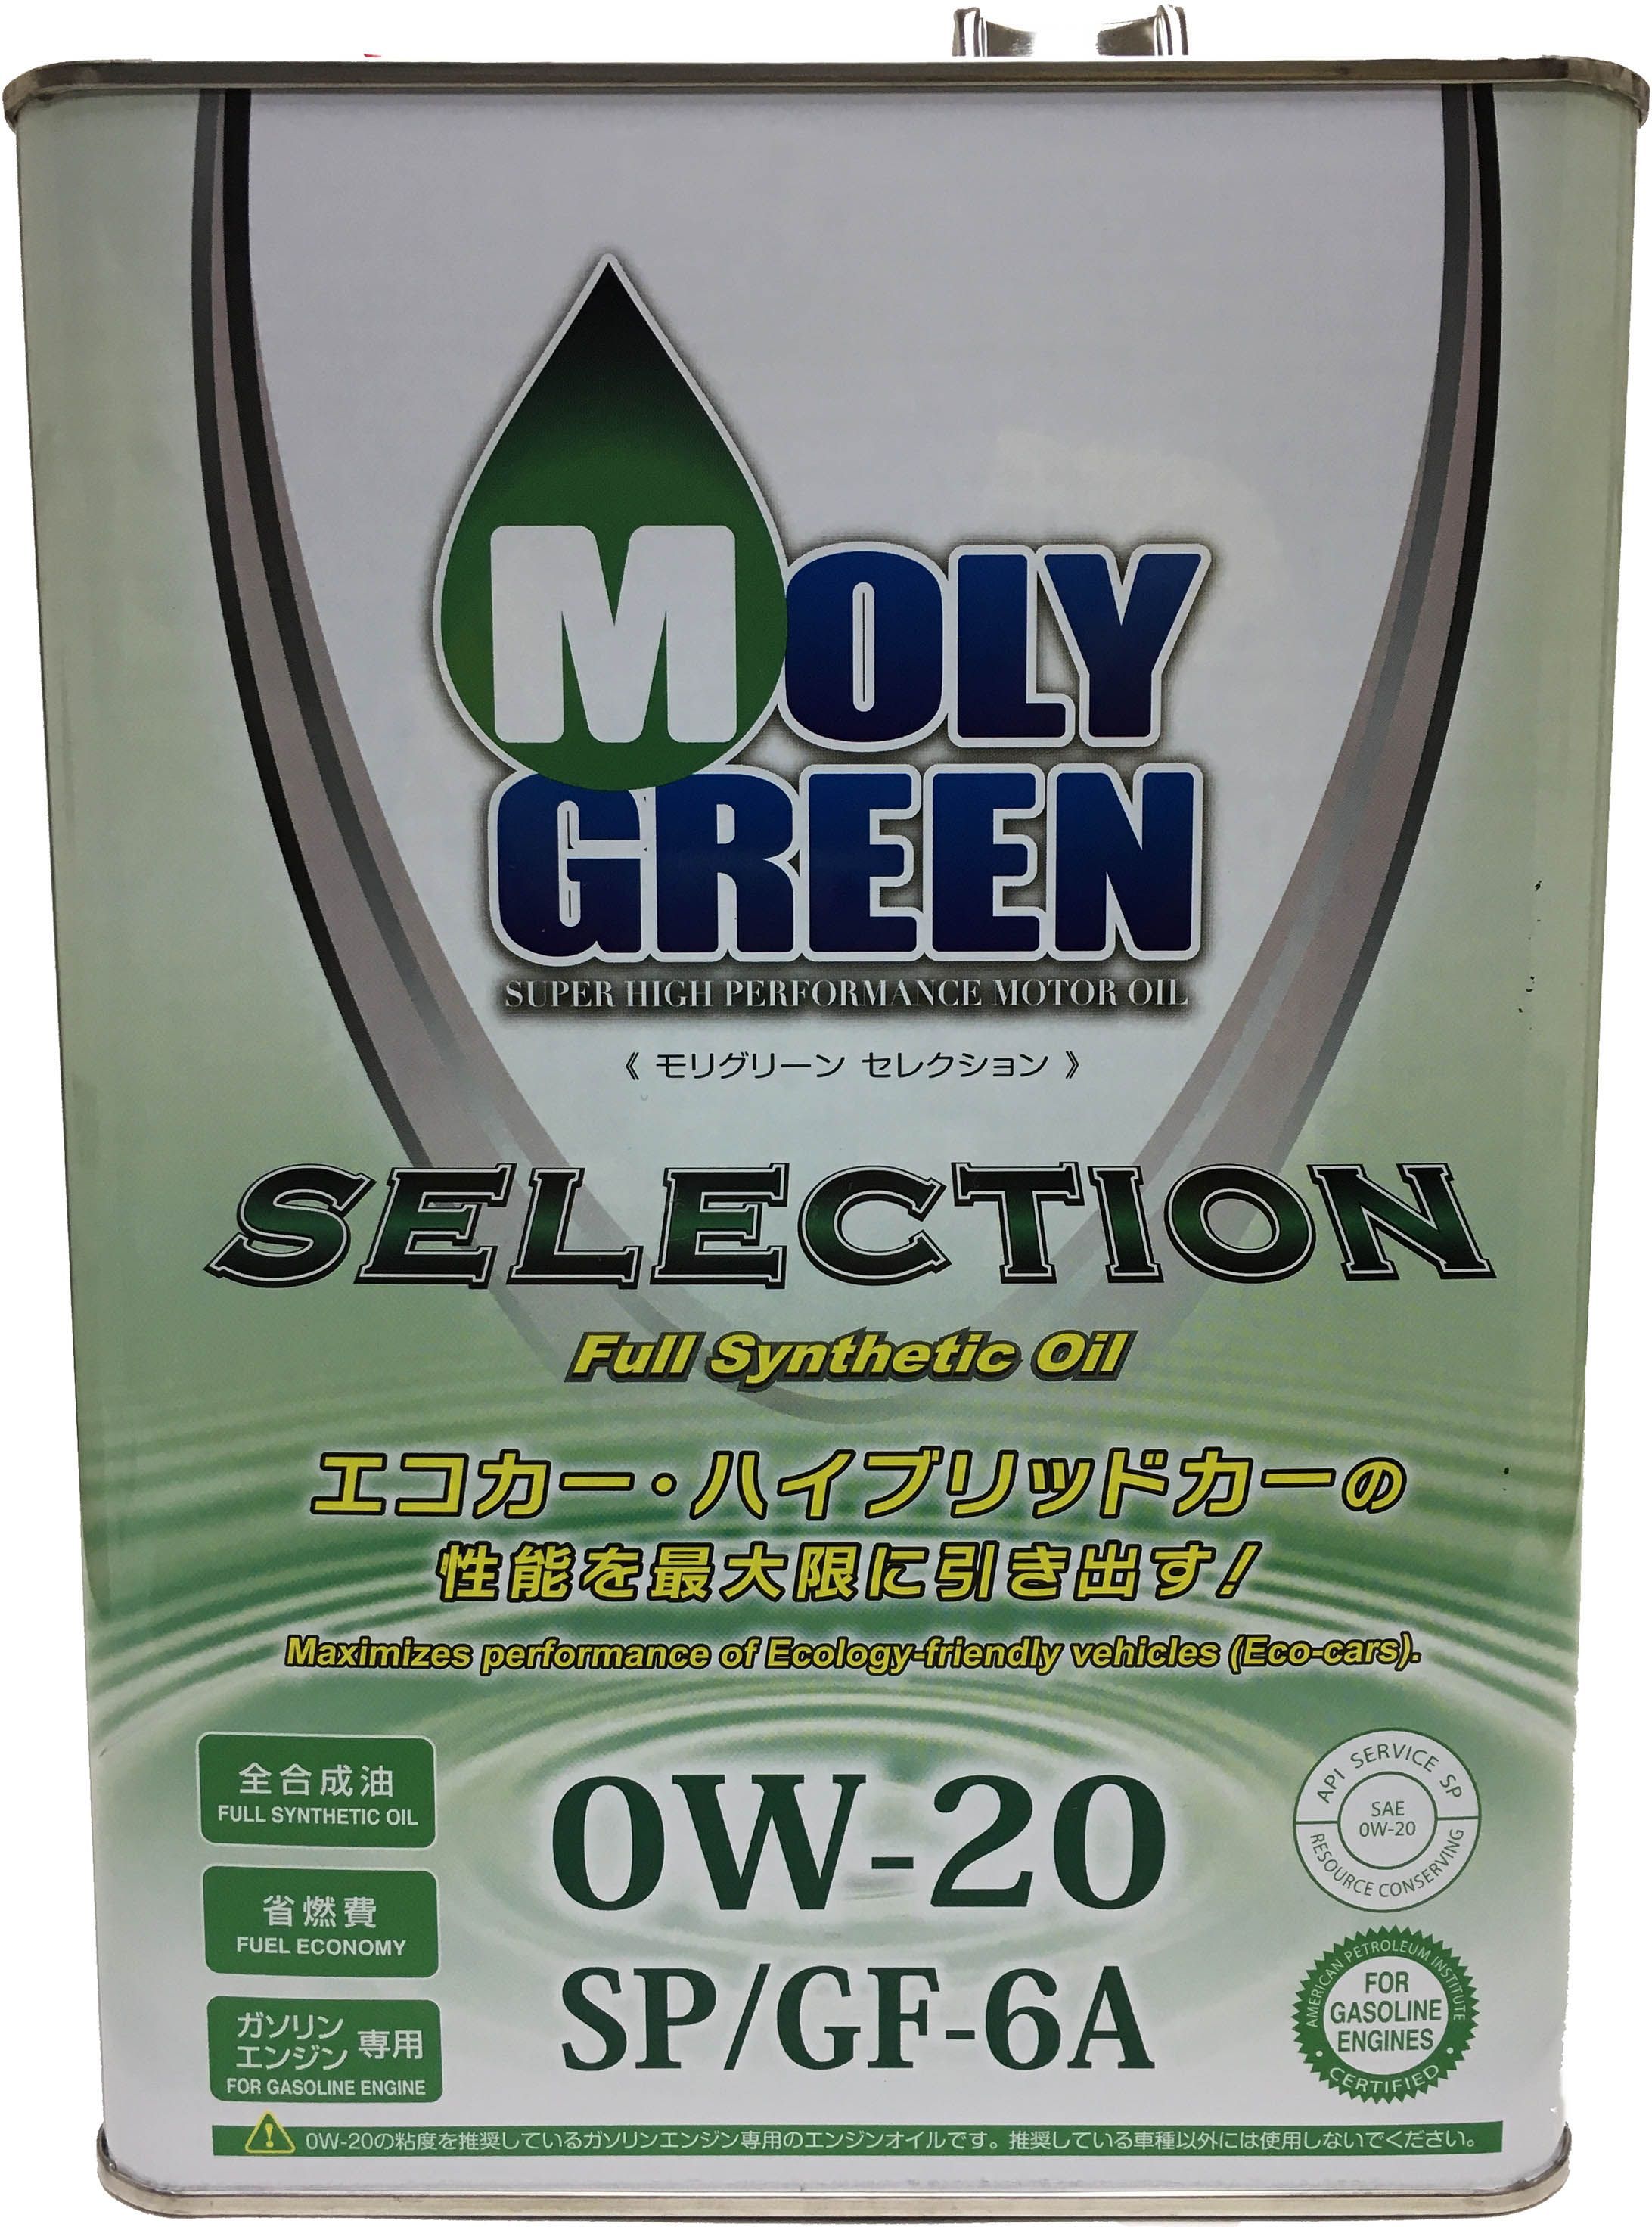 MOLYGREEN selection 0w-20 SP? Gf-6a (4,0). Масло моли Грин 0w20. Моли Грин 0 в 20. Moly Green Premium 0w30. Отзыв масло moly green